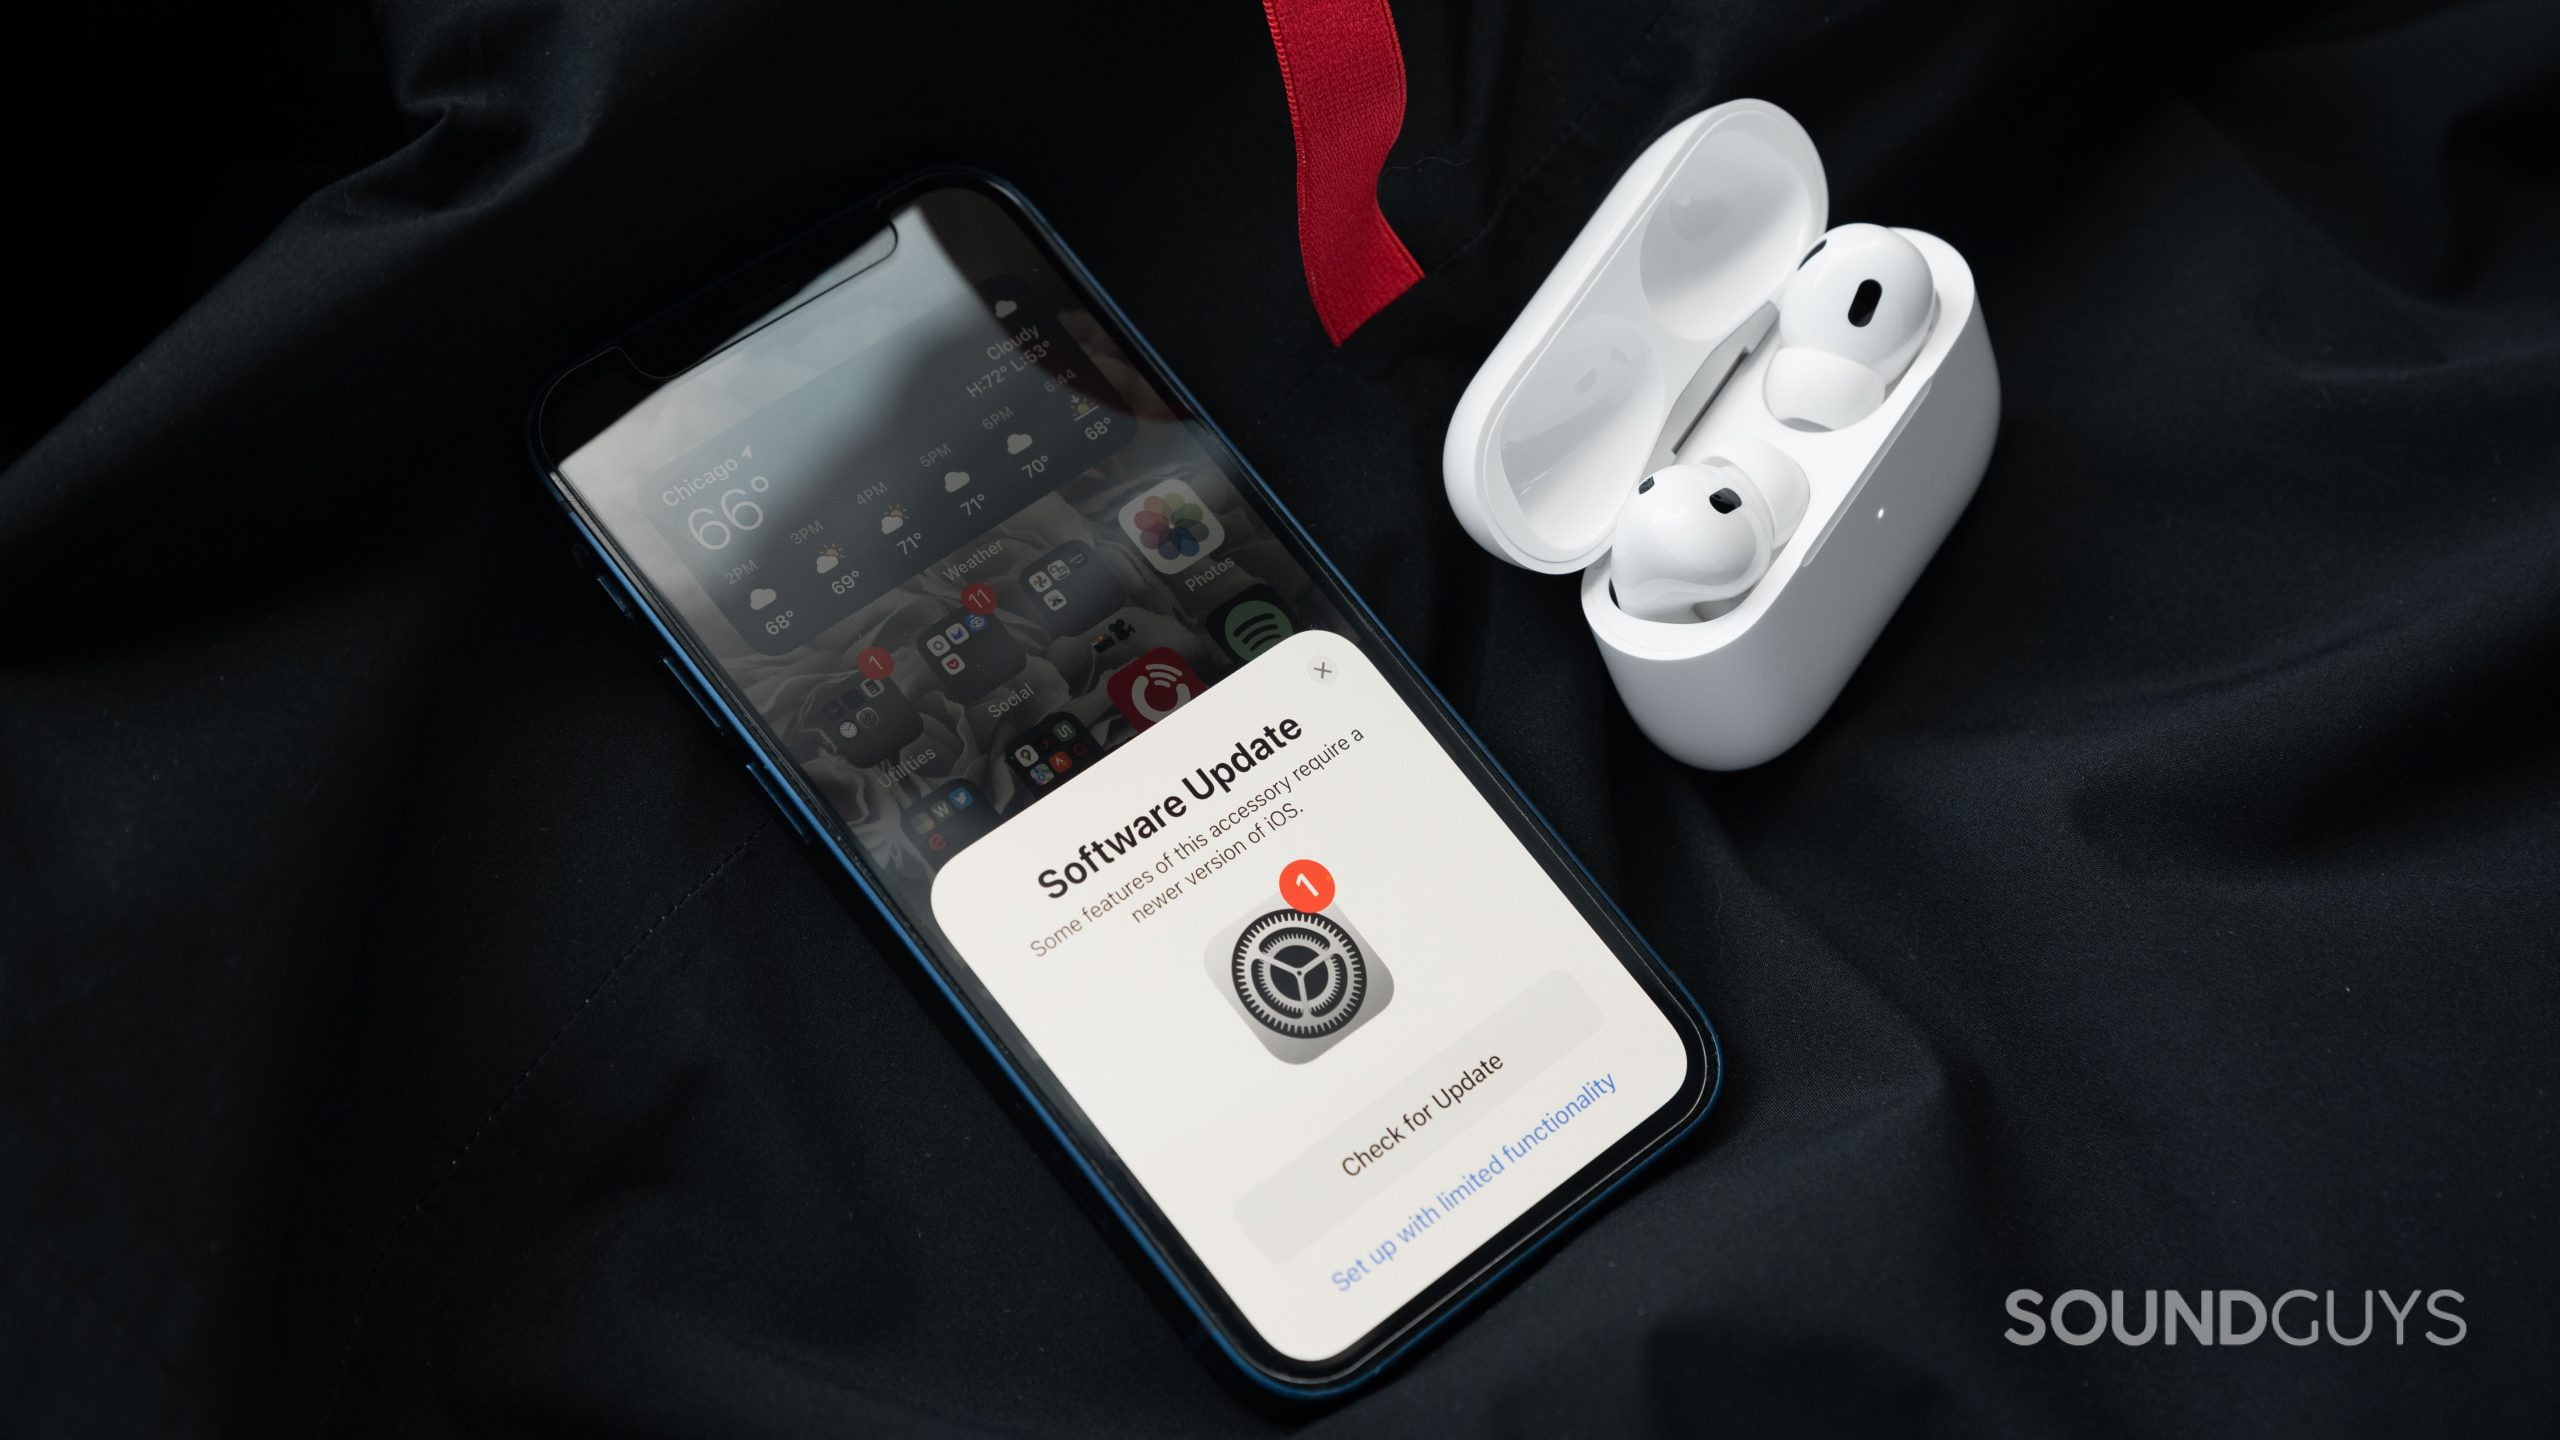 Slikke analog glans Don't use AirPods with Android - SoundGuys